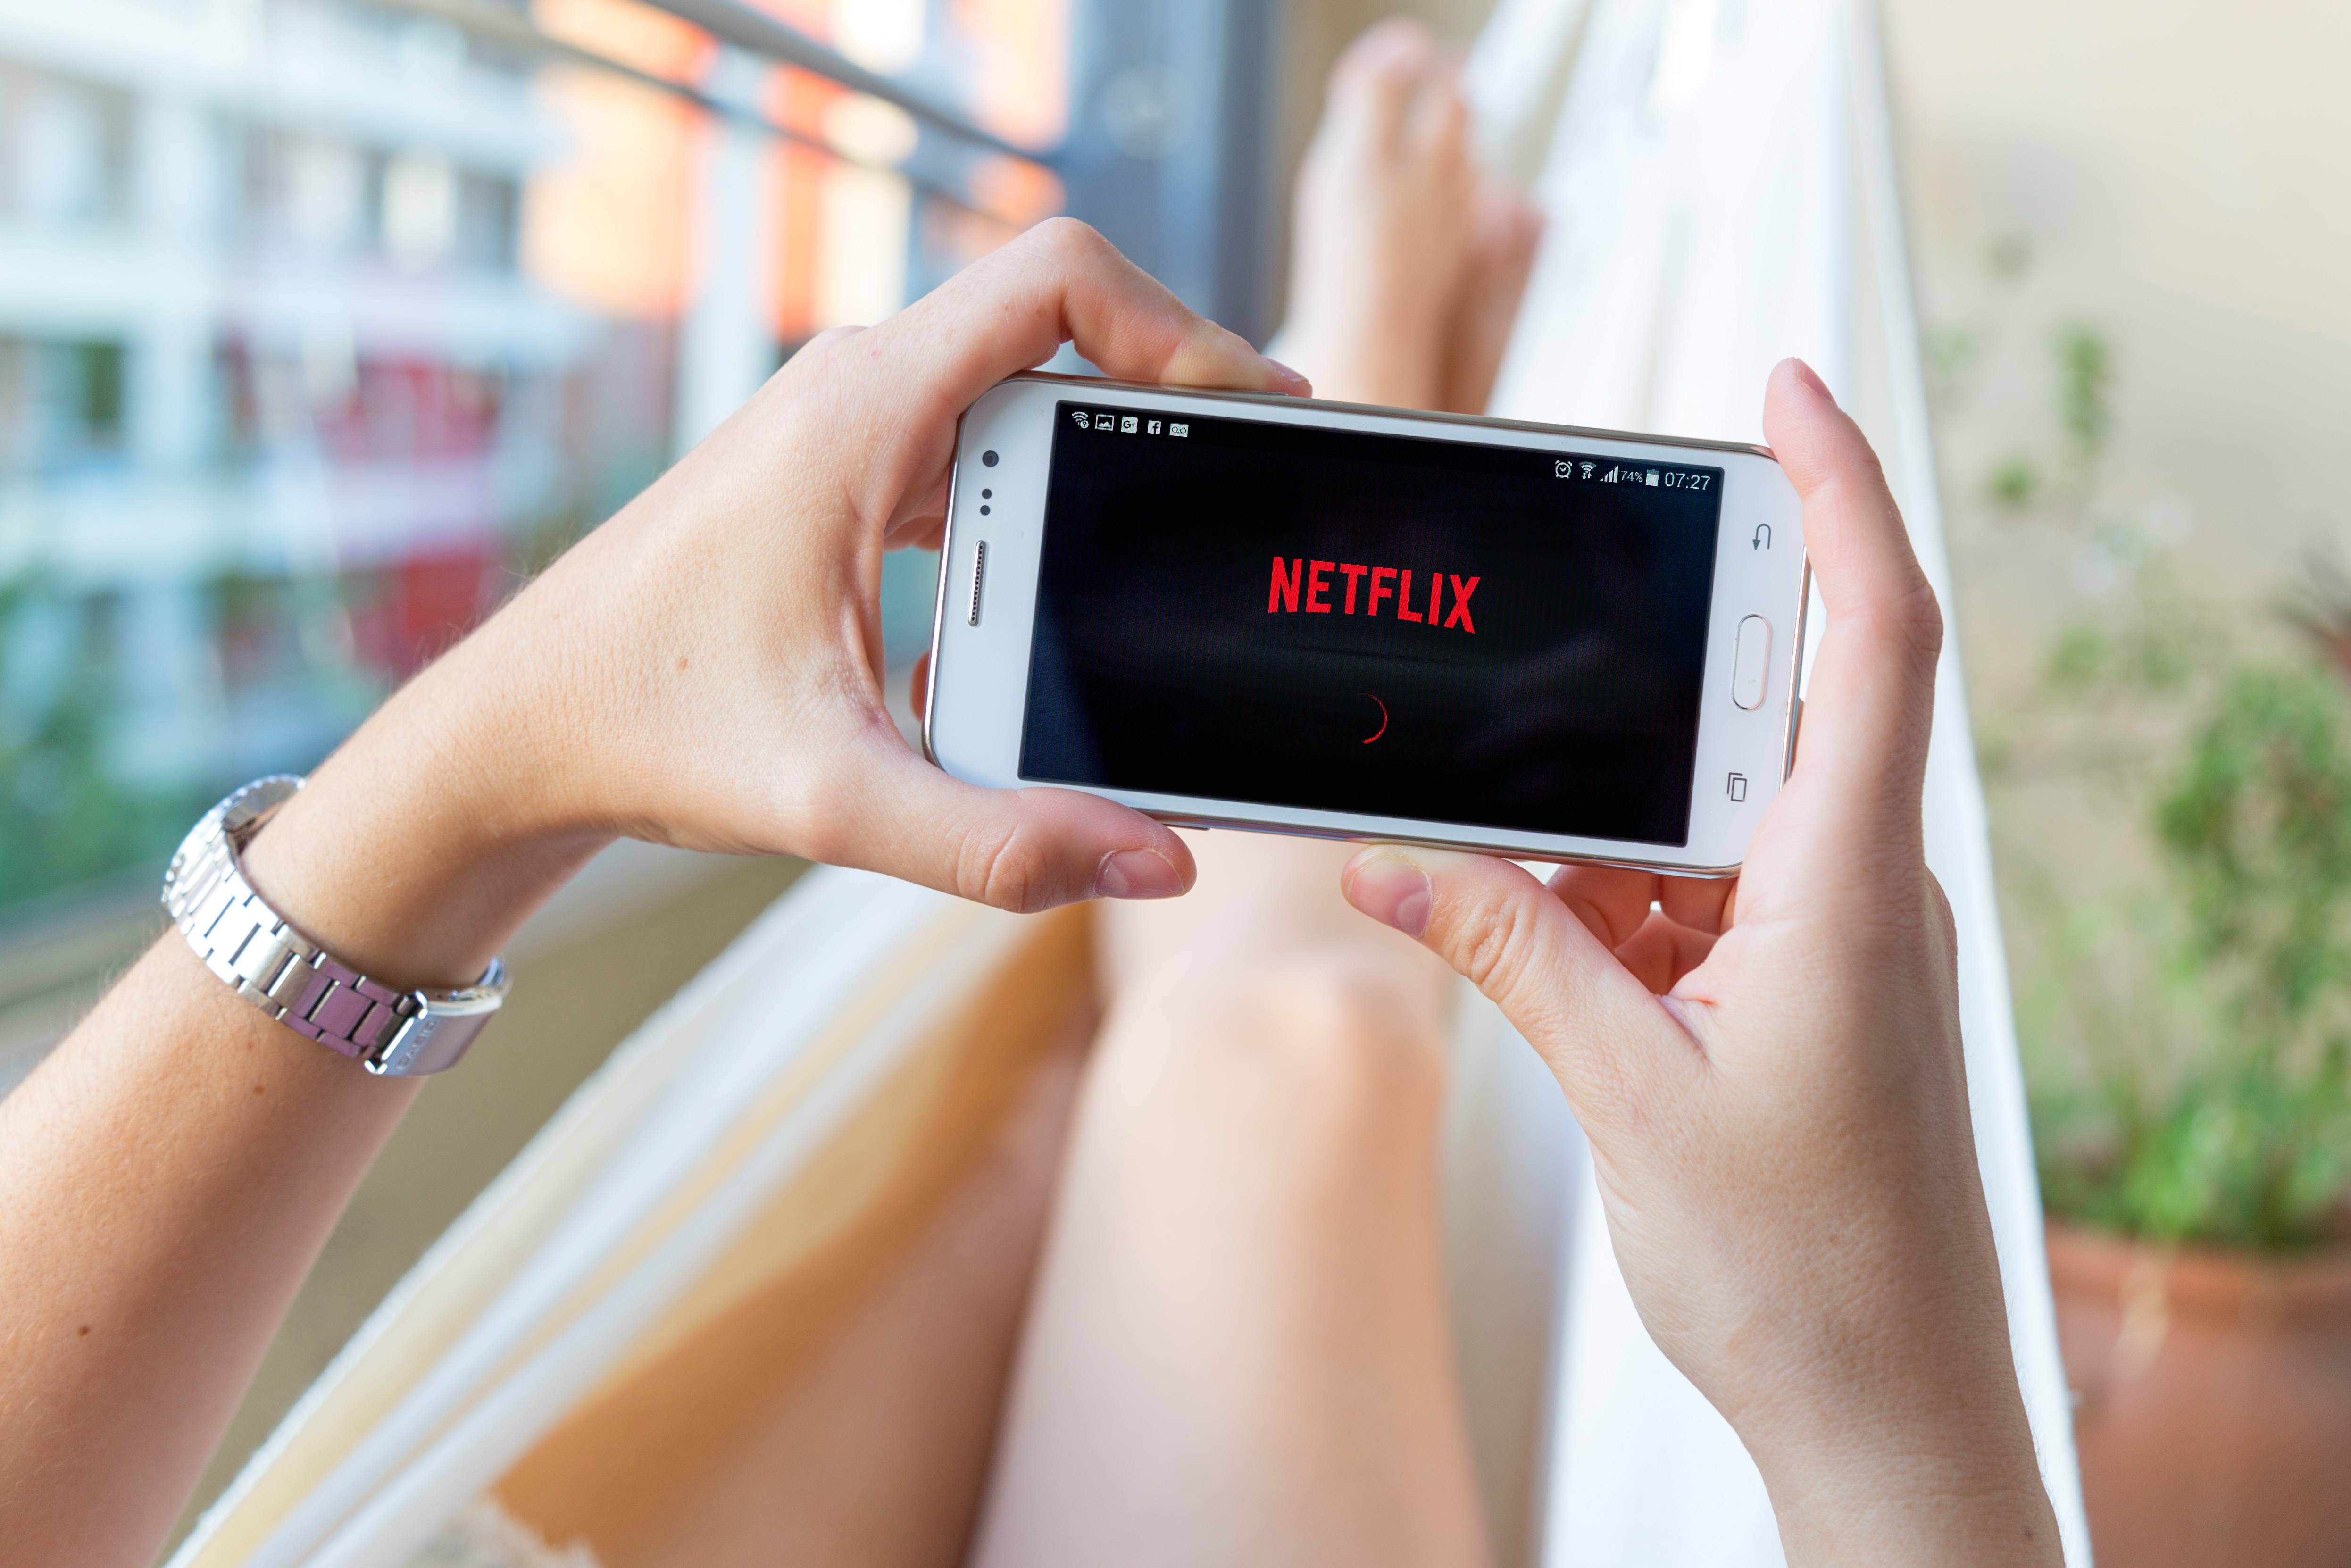 Netflix Announces New ‘My Netflix’ App, Making Finding What You Want to Watch Even Easier